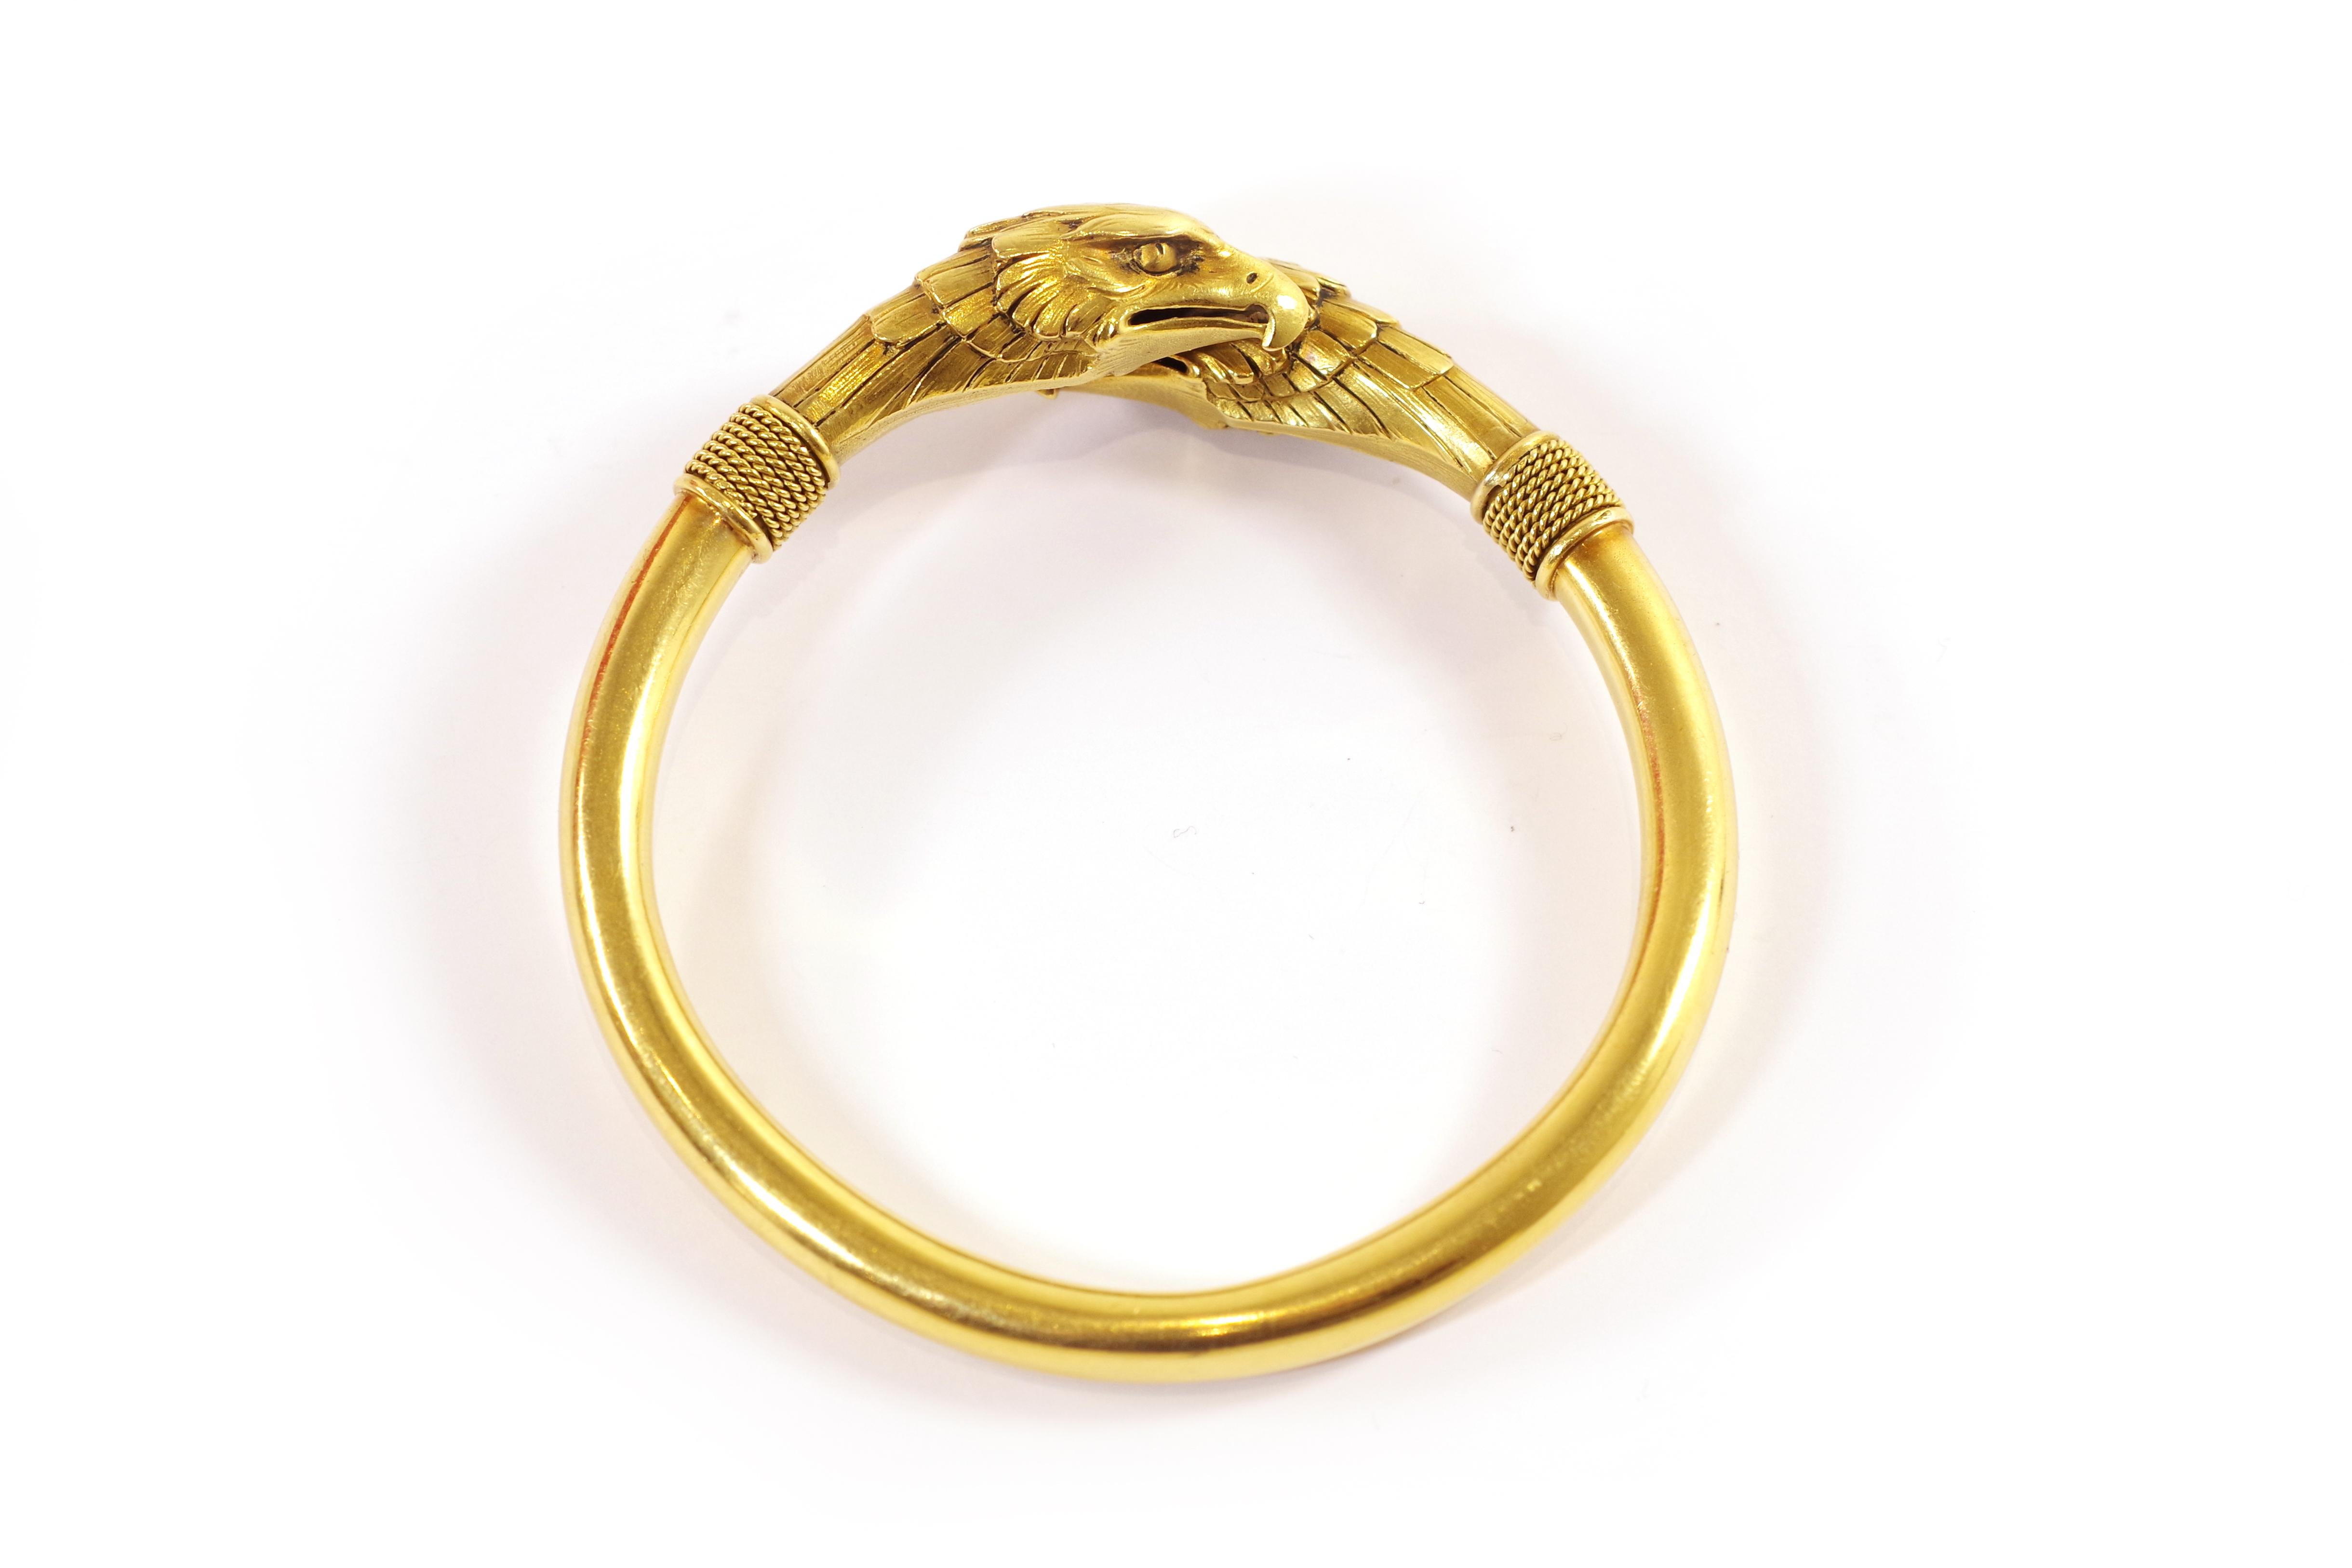 Antique gold eagle heads bangle bracelet in yellow gold 18 karats. Important victorian bangle bracelet, decorated with two heads of eagles facing each other at the ends of the bracelet. The head of the raptors is finely executed: the plumage and the